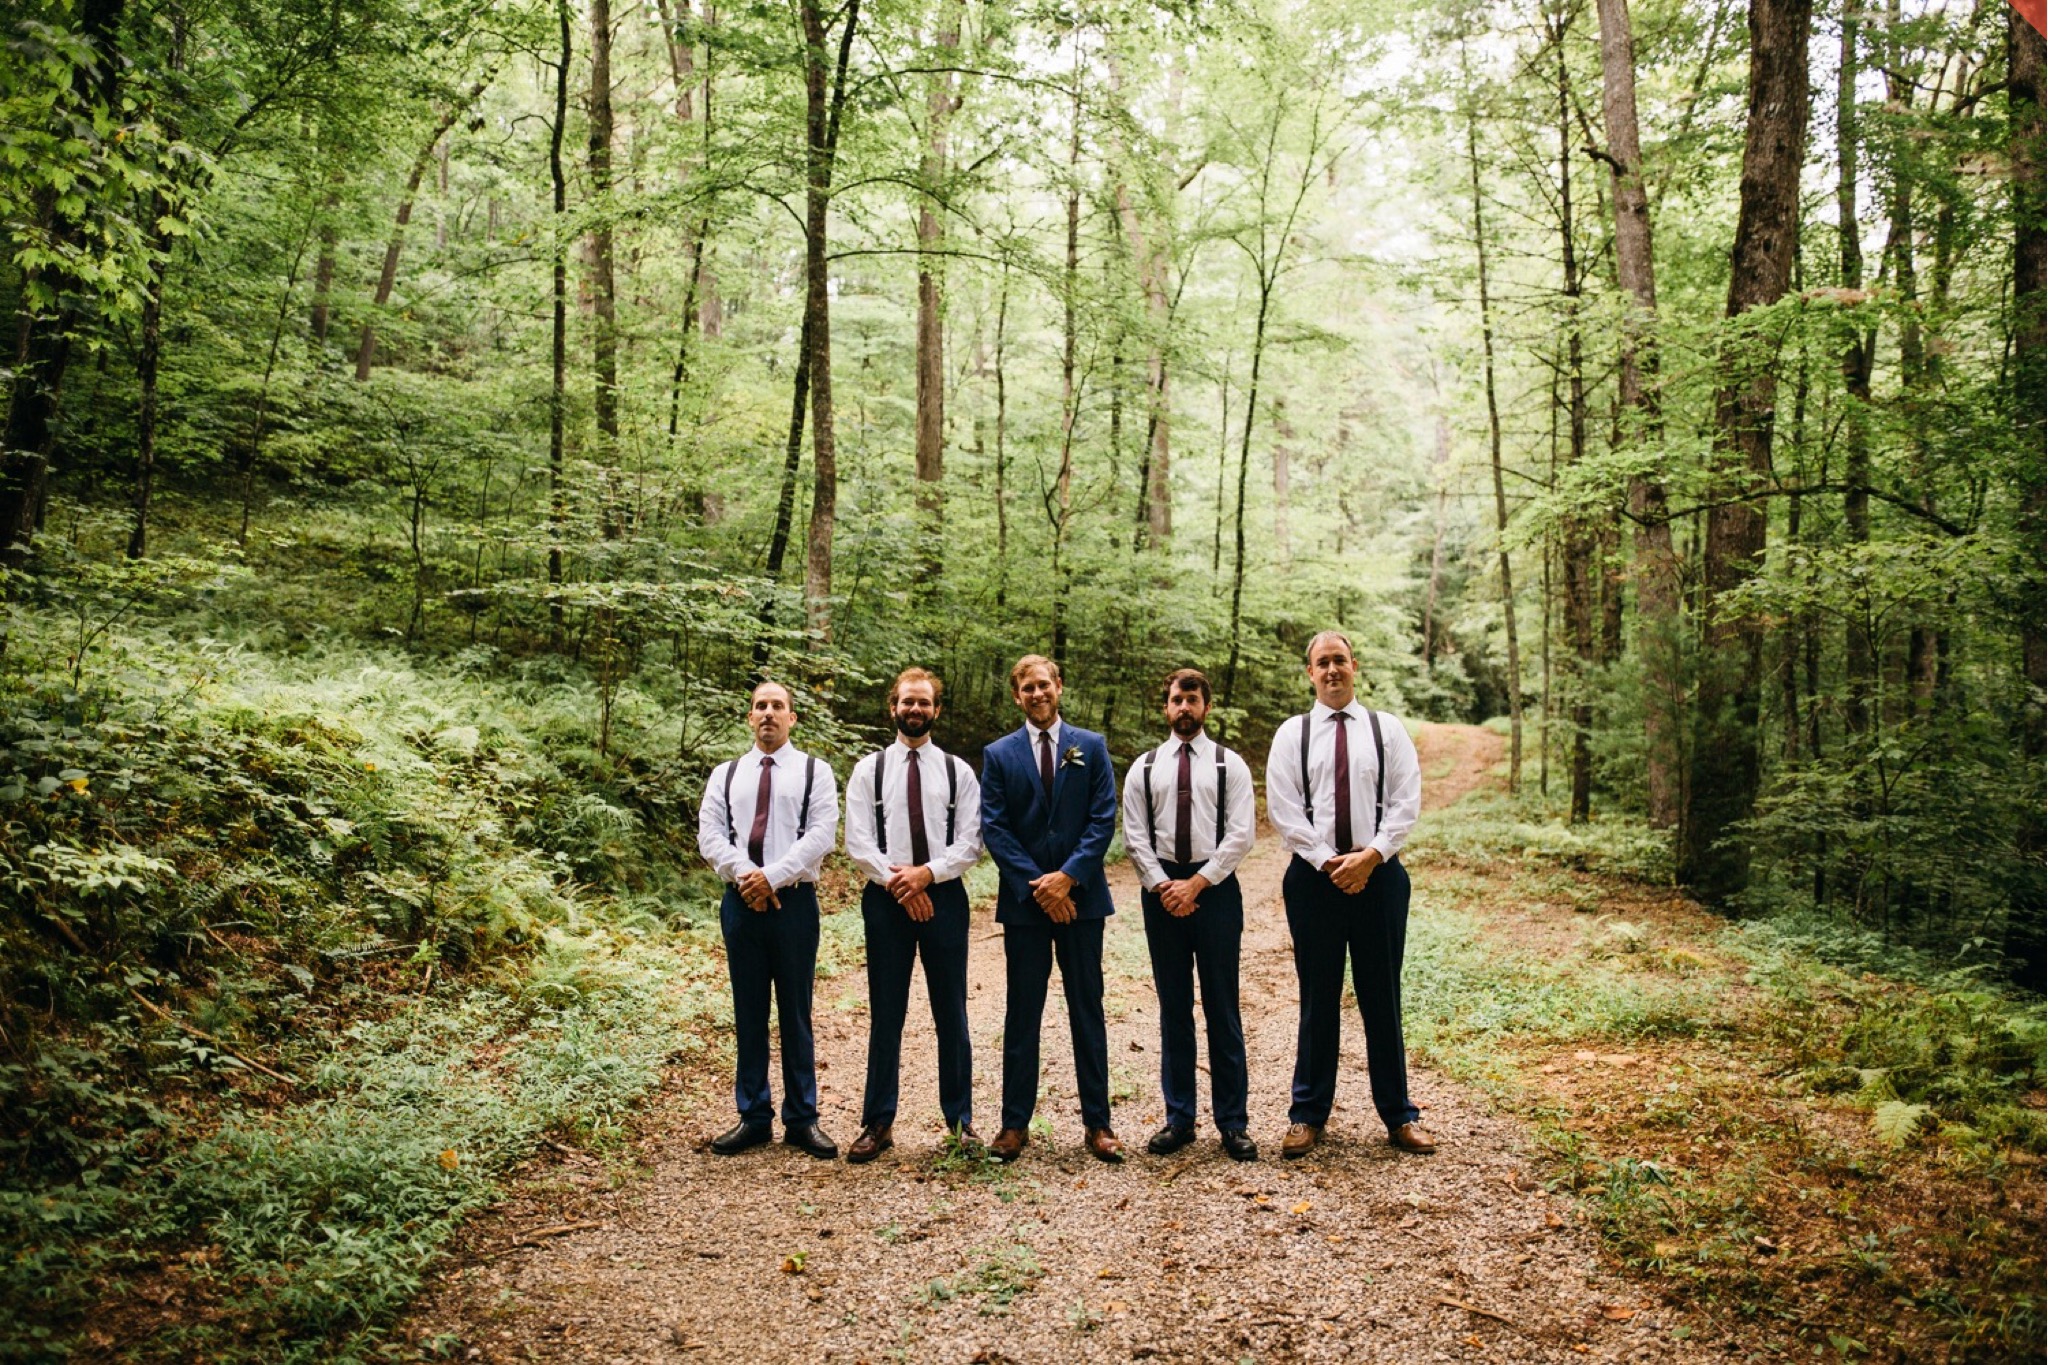 The groom poses on a forest path with his four groomsmen.